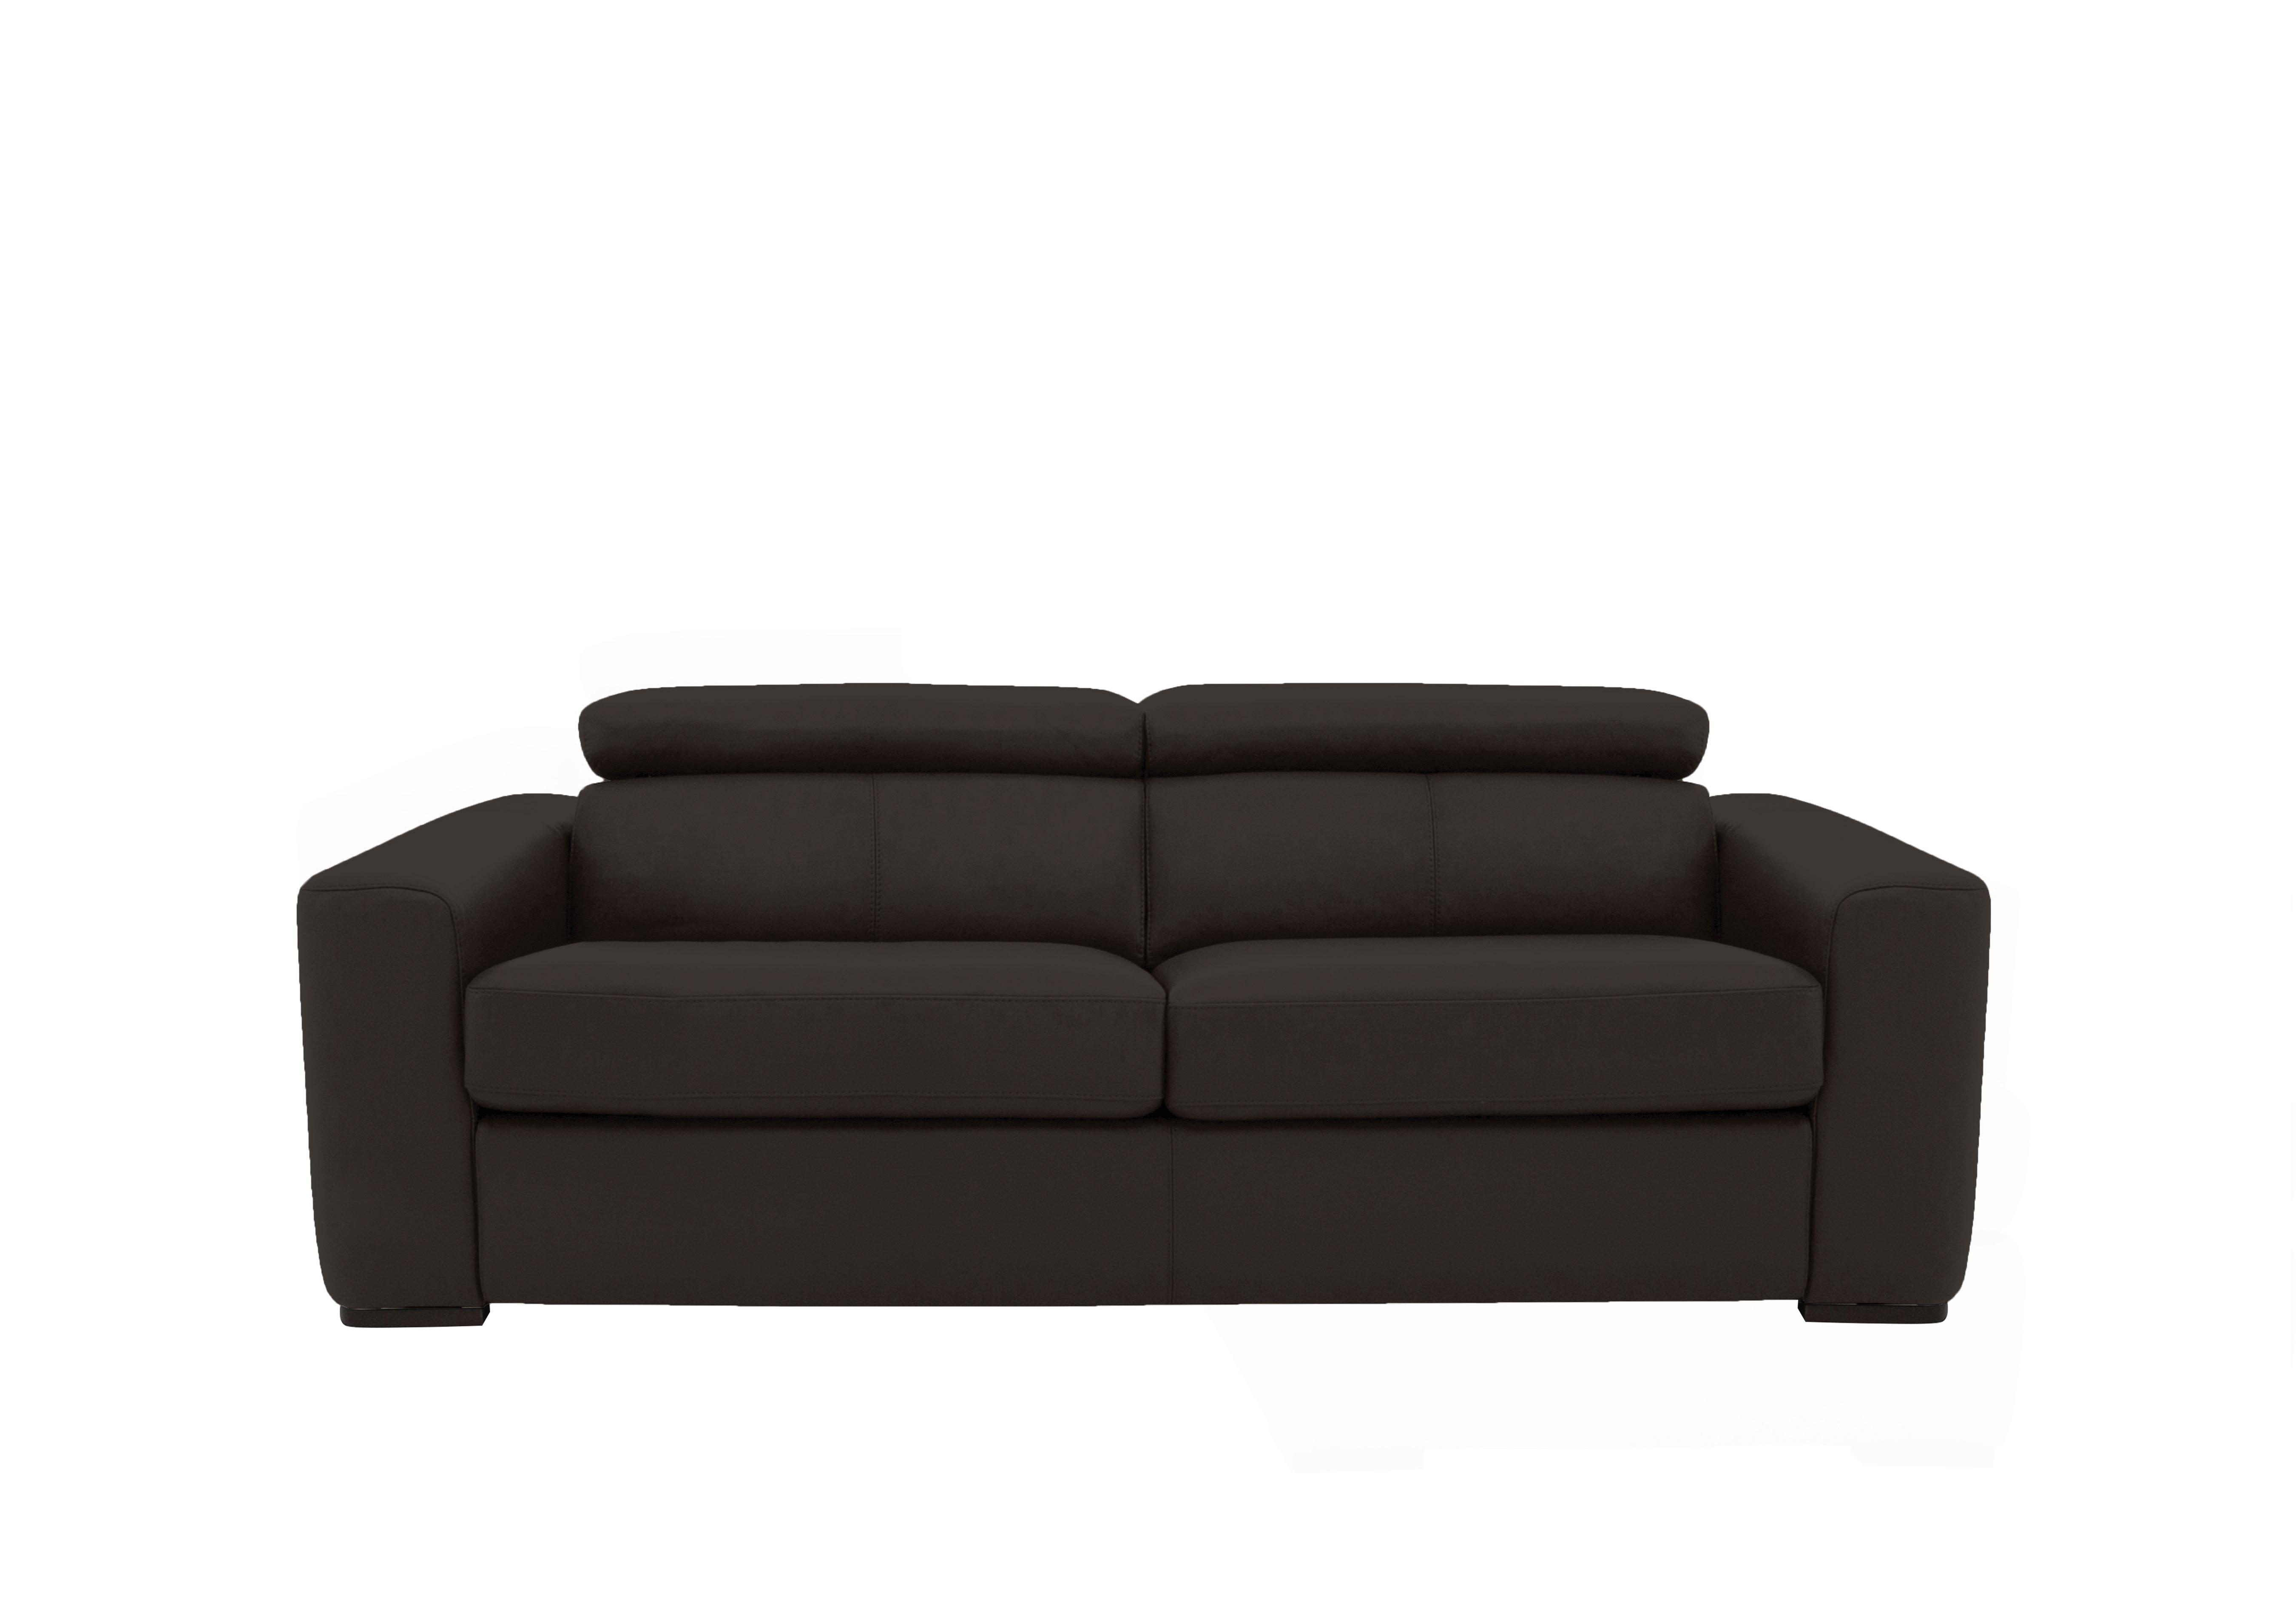 Infinity 3 Seater Leather Sofa in Bv-1748 Dark Chocolate on Furniture Village